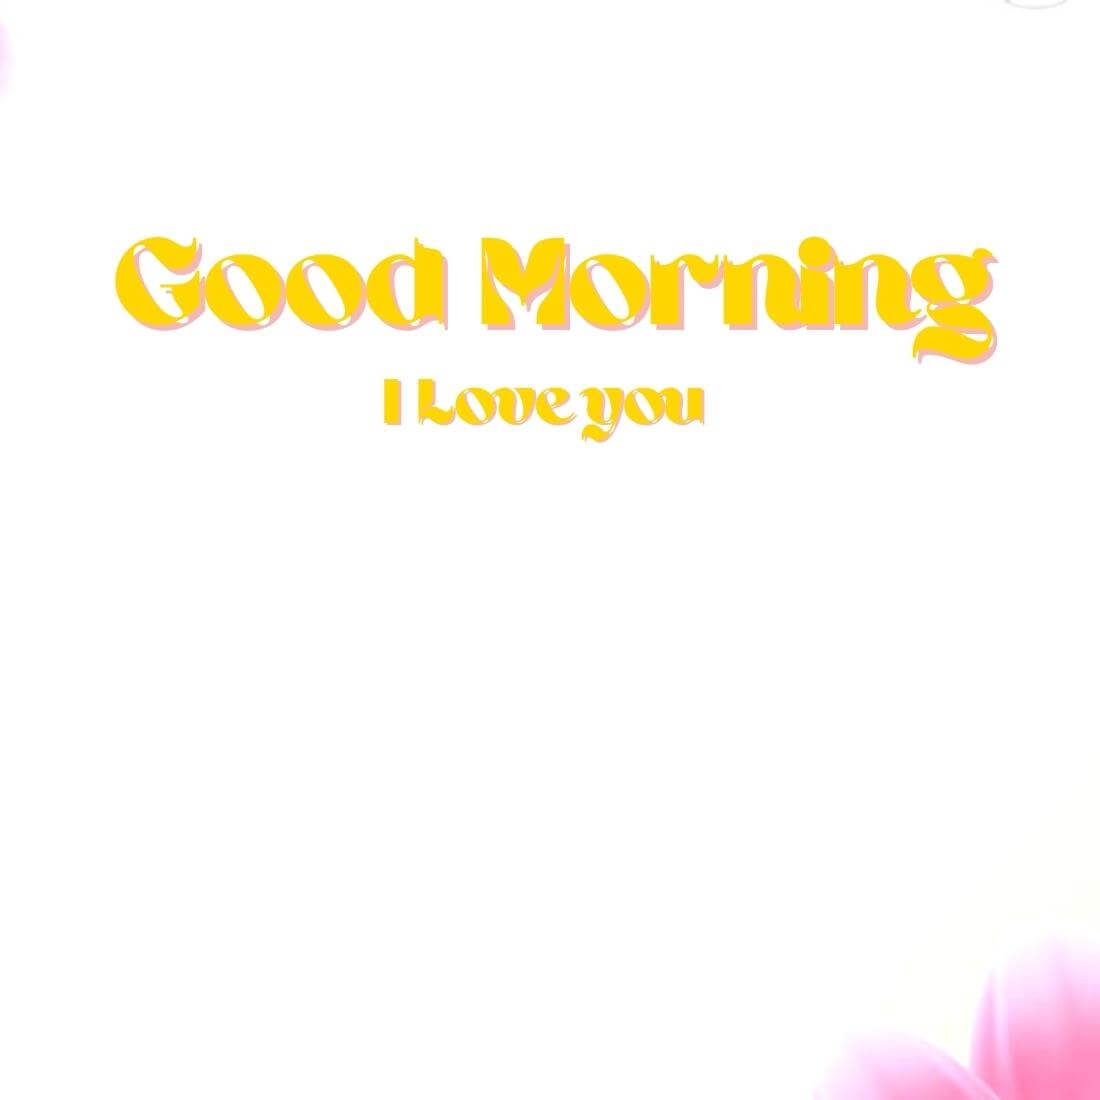 Good Morning I Love You Wallpaper Free Download